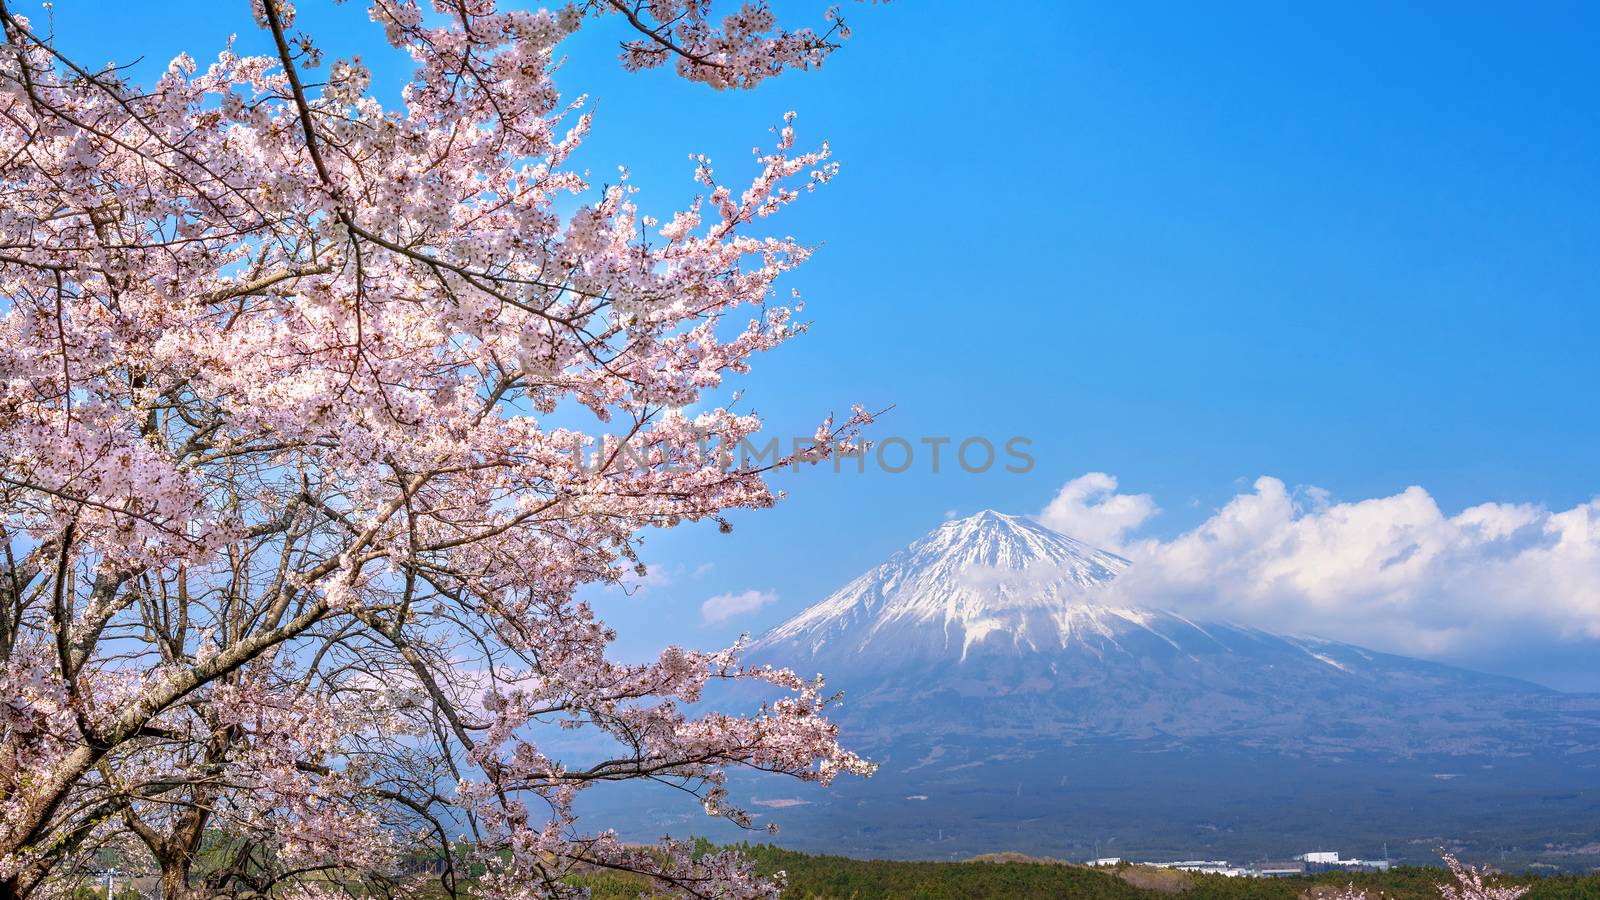 Fuji mountain and cherry blossom in spring, Fujinomiya in Japan. by gutarphotoghaphy